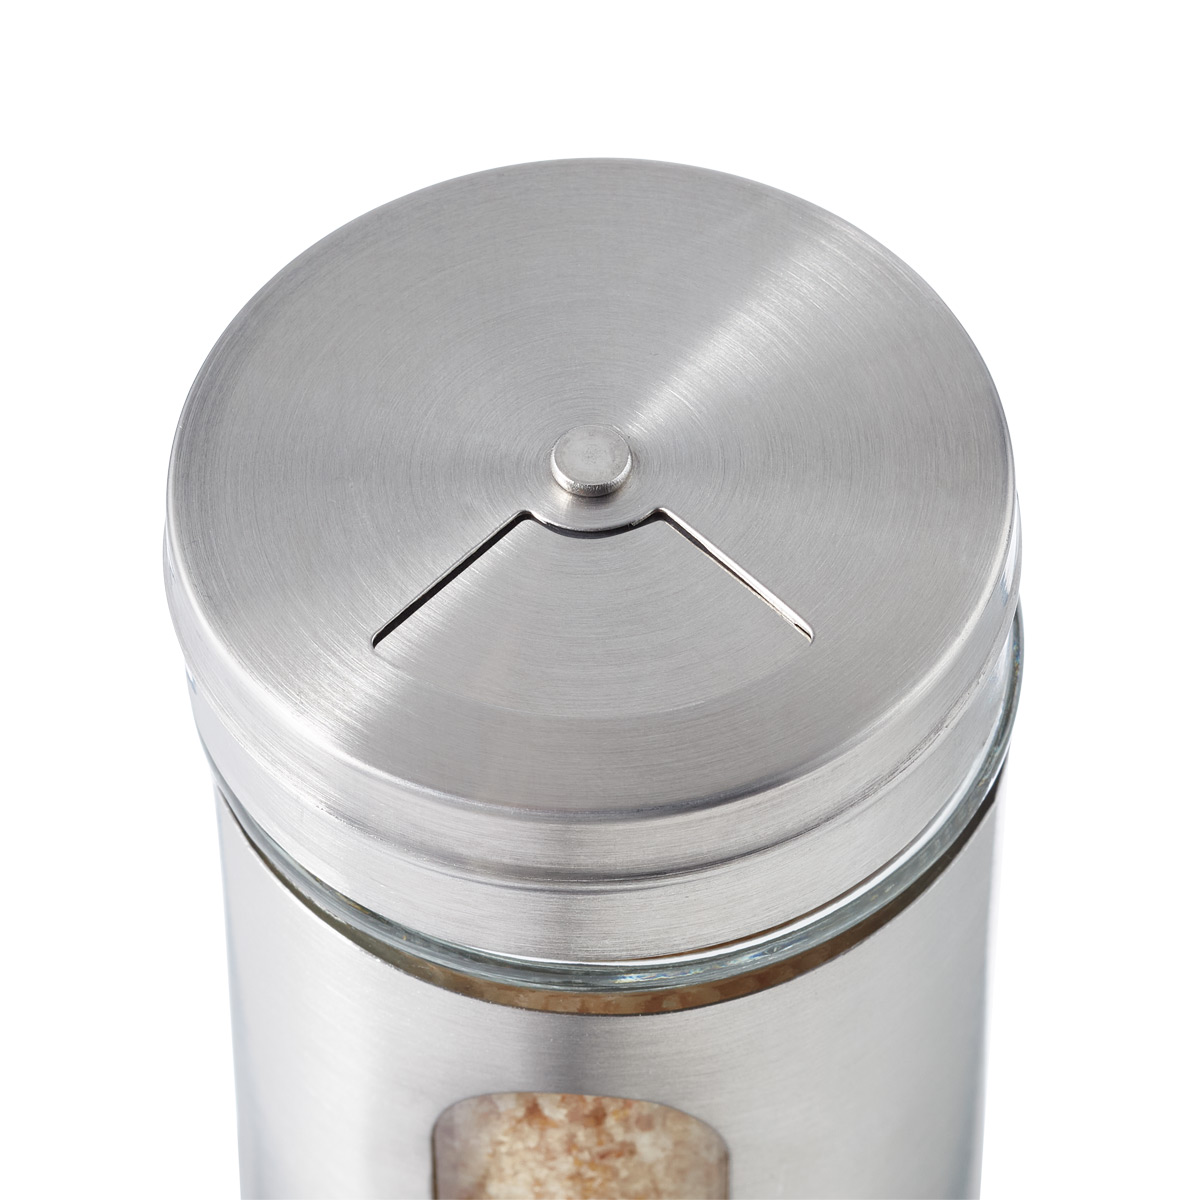 https://www.containerstore.com/catalogimages/433220/10085713_2.7_Oz_Glass_Spice_Jar_With.jpg